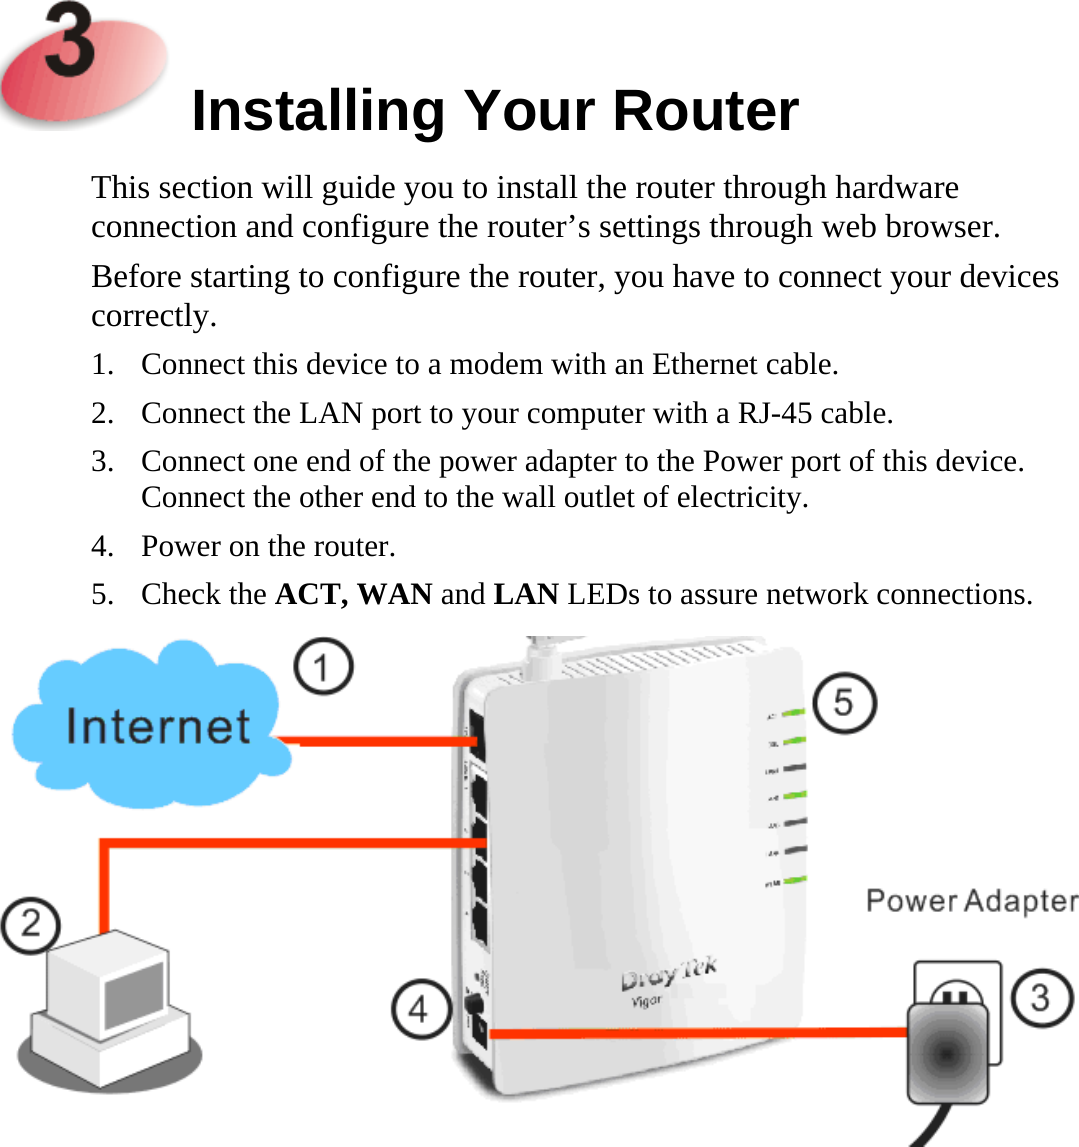     Installing Your Router  This section will guide you to install the router through hardware connection and configure the router’s settings through web browser.   Before starting to configure the router, you have to connect your devices correctly. 1. Connect this device to a modem with an Ethernet cable. 2. Connect the LAN port to your computer with a RJ-45 cable.   3. Connect one end of the power adapter to the Power port of this device. Connect the other end to the wall outlet of electricity. 4. Power on the router. 5. Check the ACT, WAN and LAN LEDs to assure network connections.  